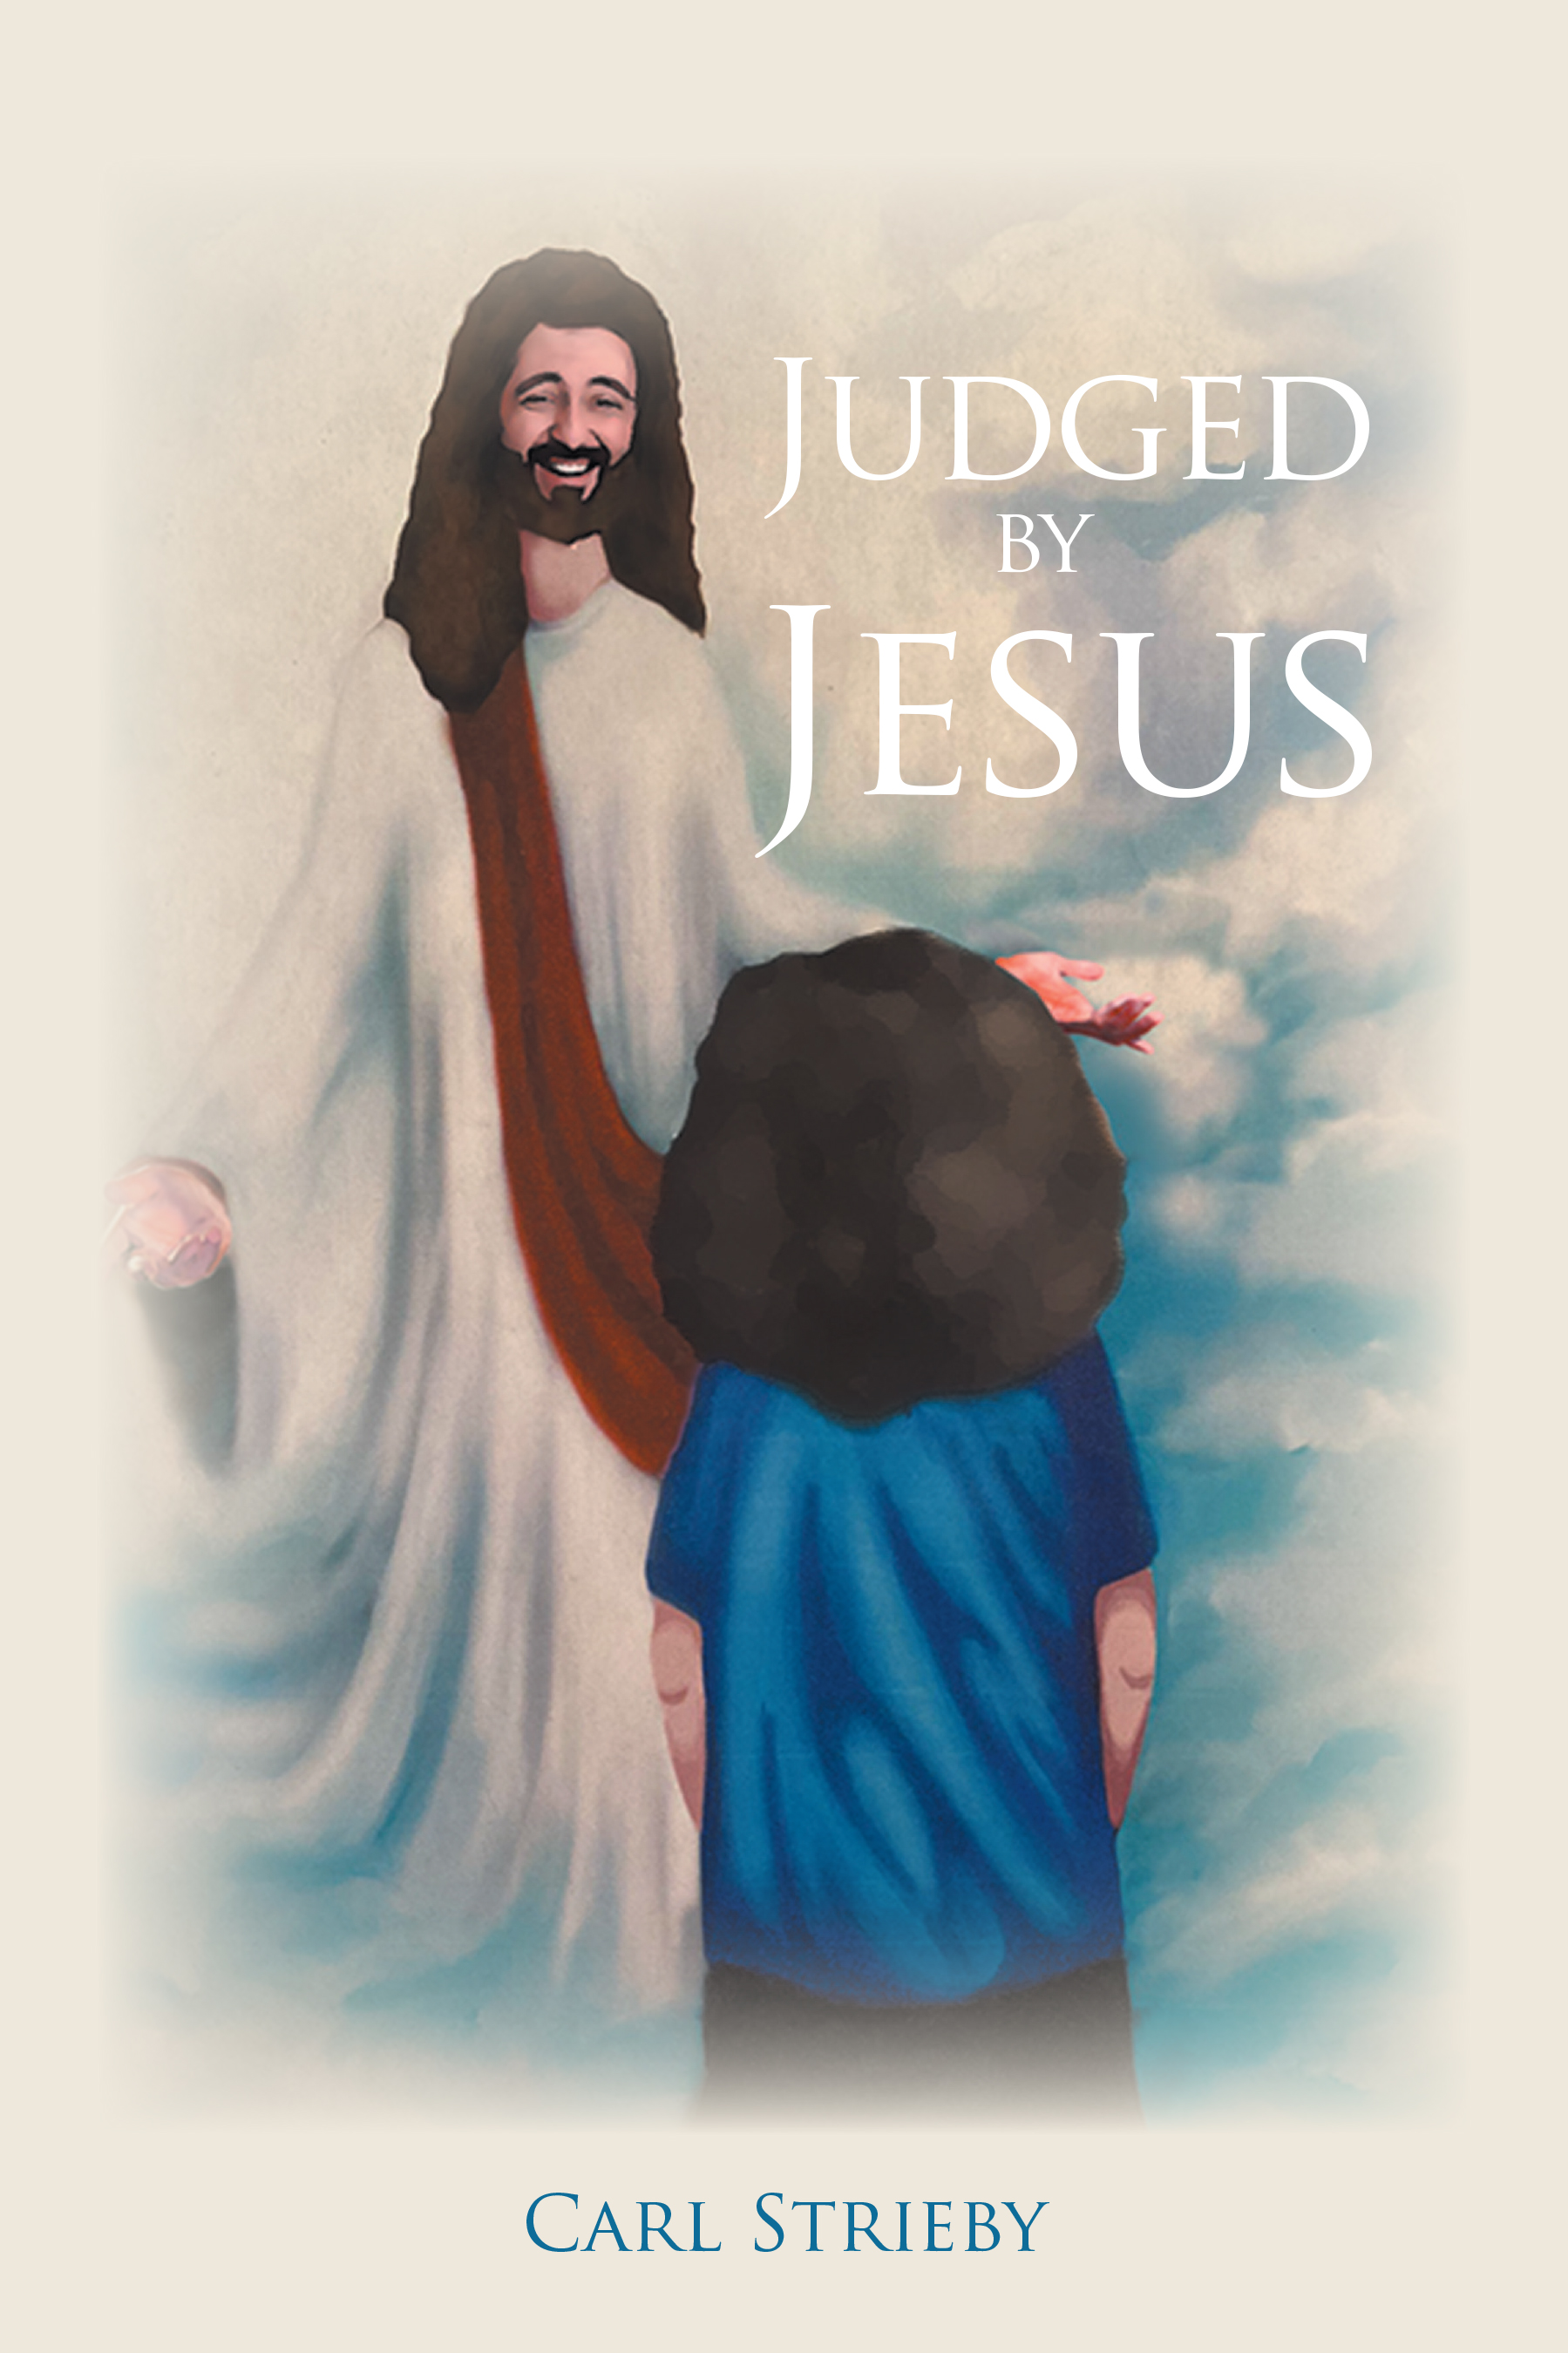 Carl Strieby’s Newly Released "Judged by Jesus" is a Profound and Inspiring Testimony of a Man’s Spiritual Discovery